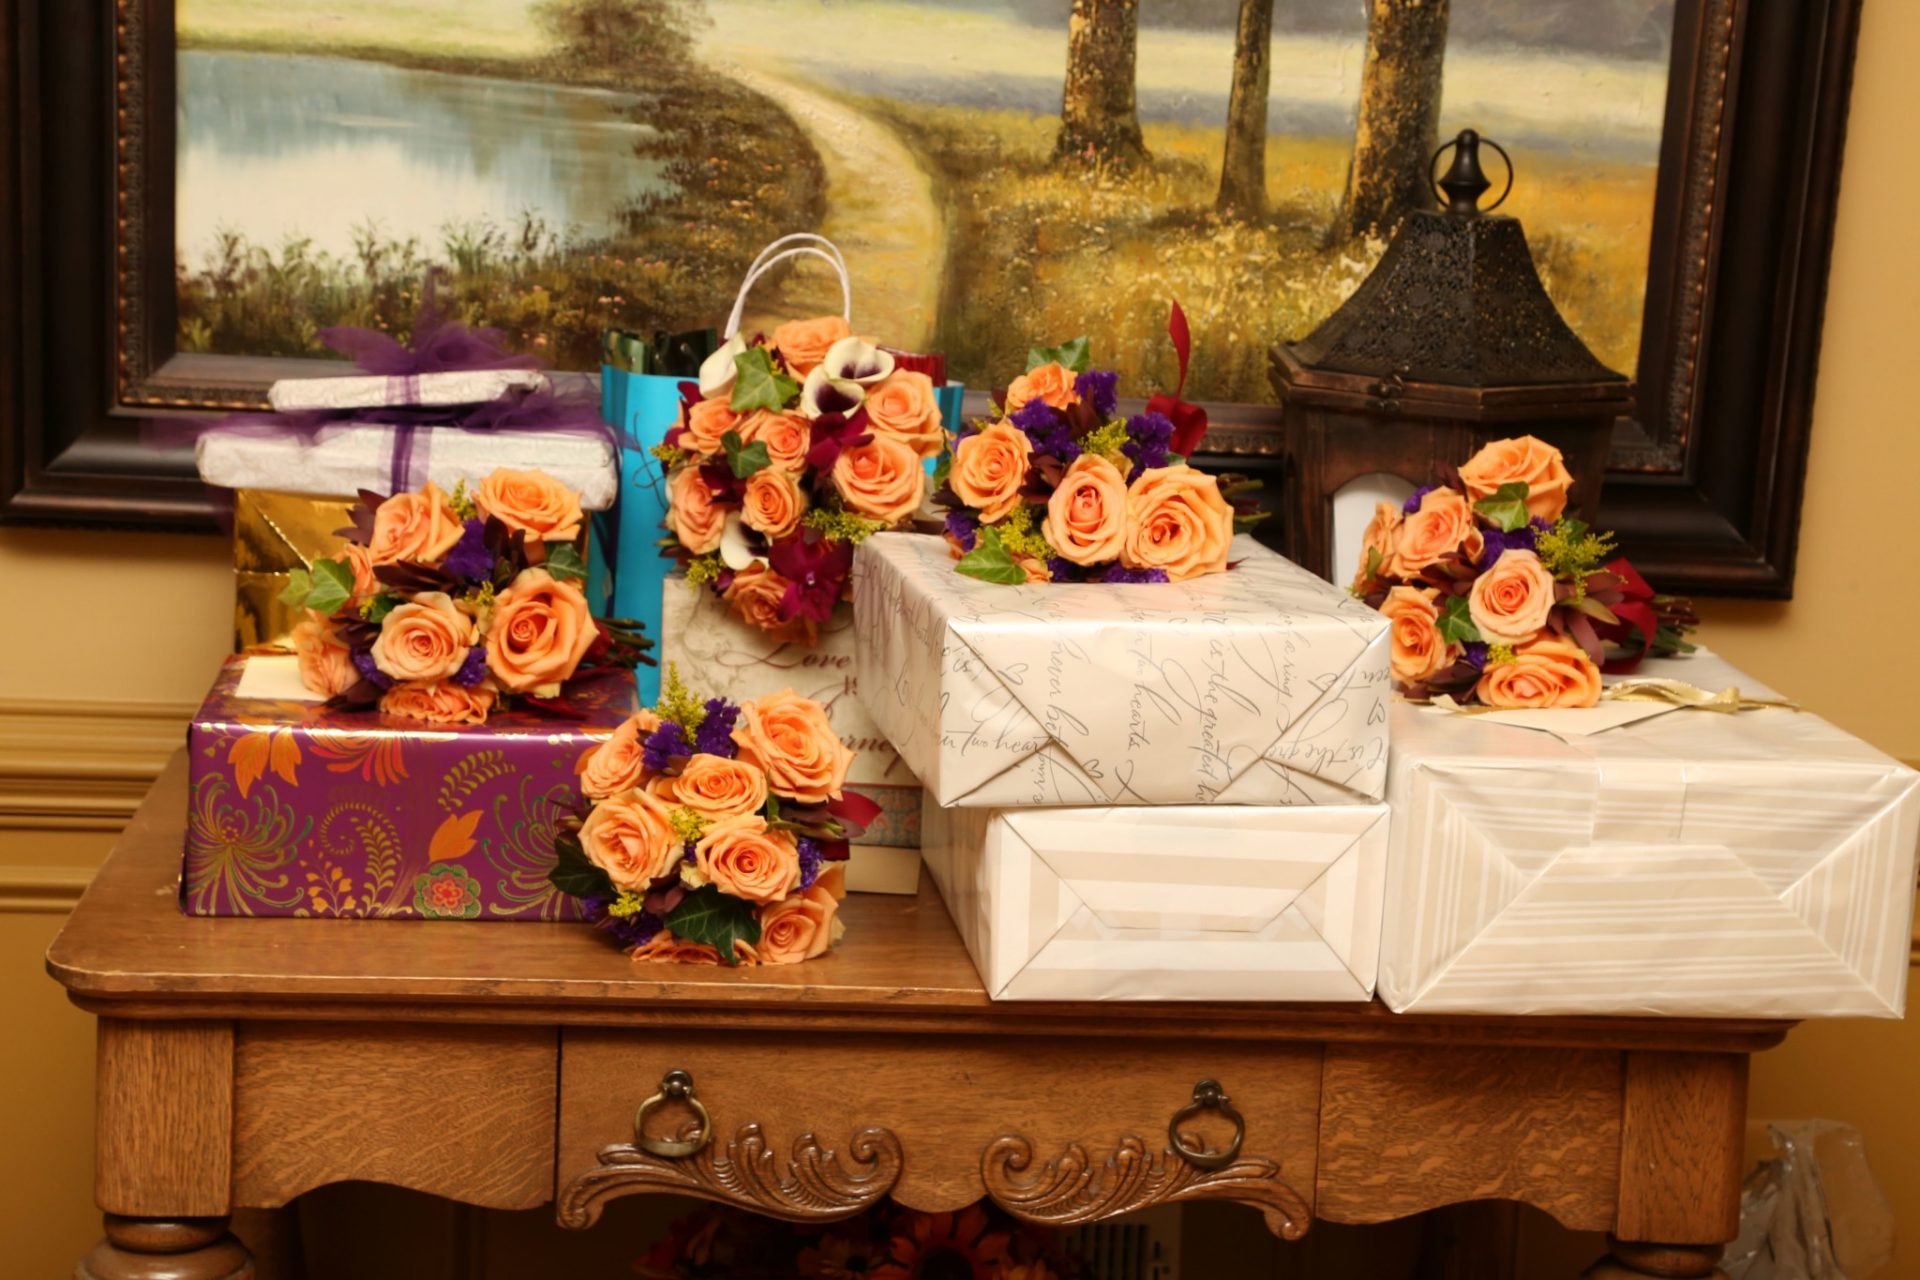 Wedding gifts are placed on table by entrance to Morningside Inn